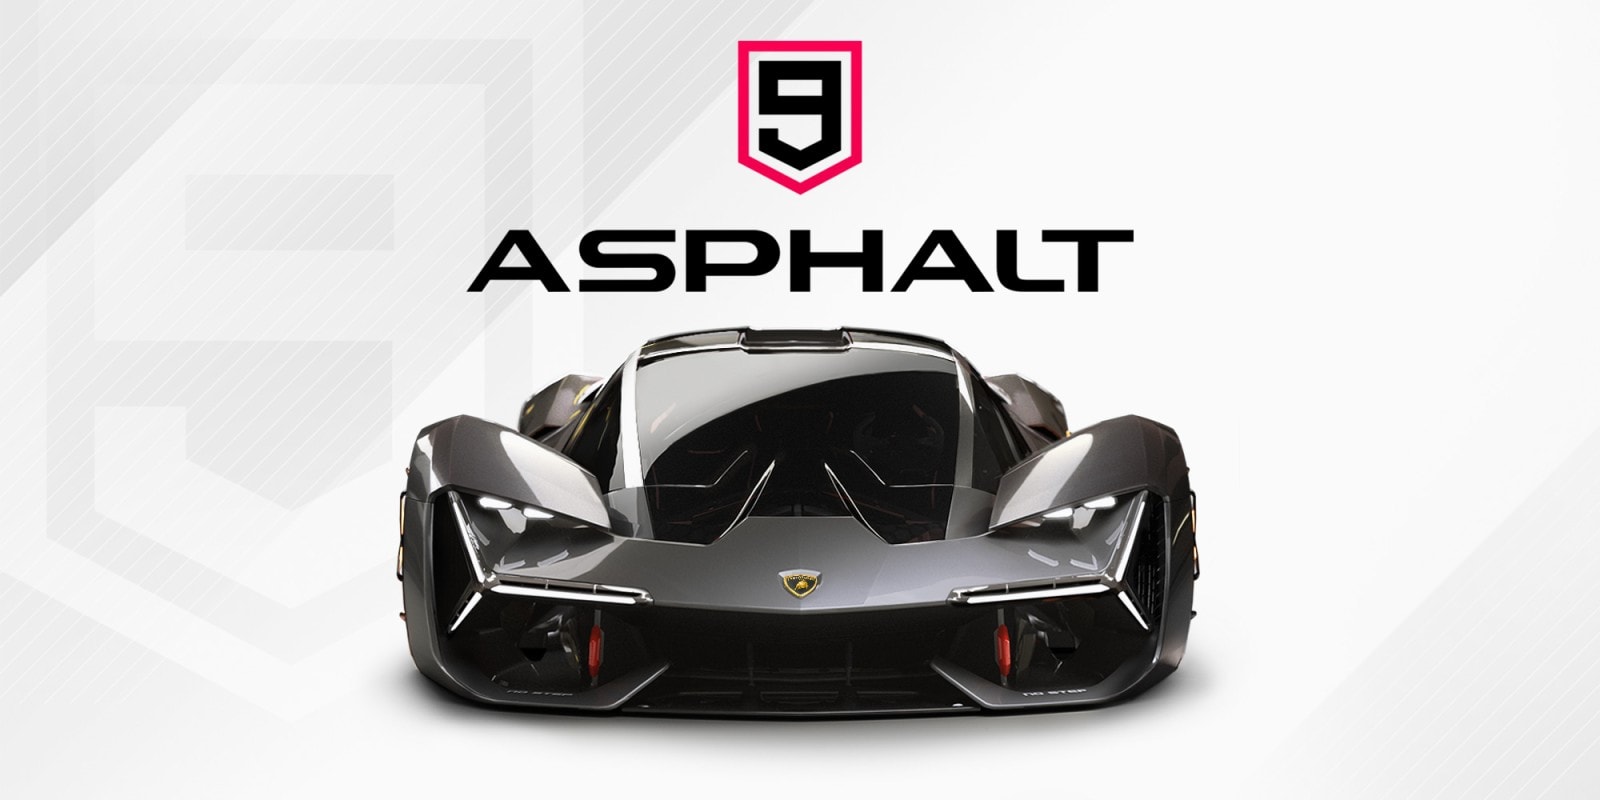 Asphalt 9: Legends Launches on Xbox Series X, S and Xbox One With Cross-Play